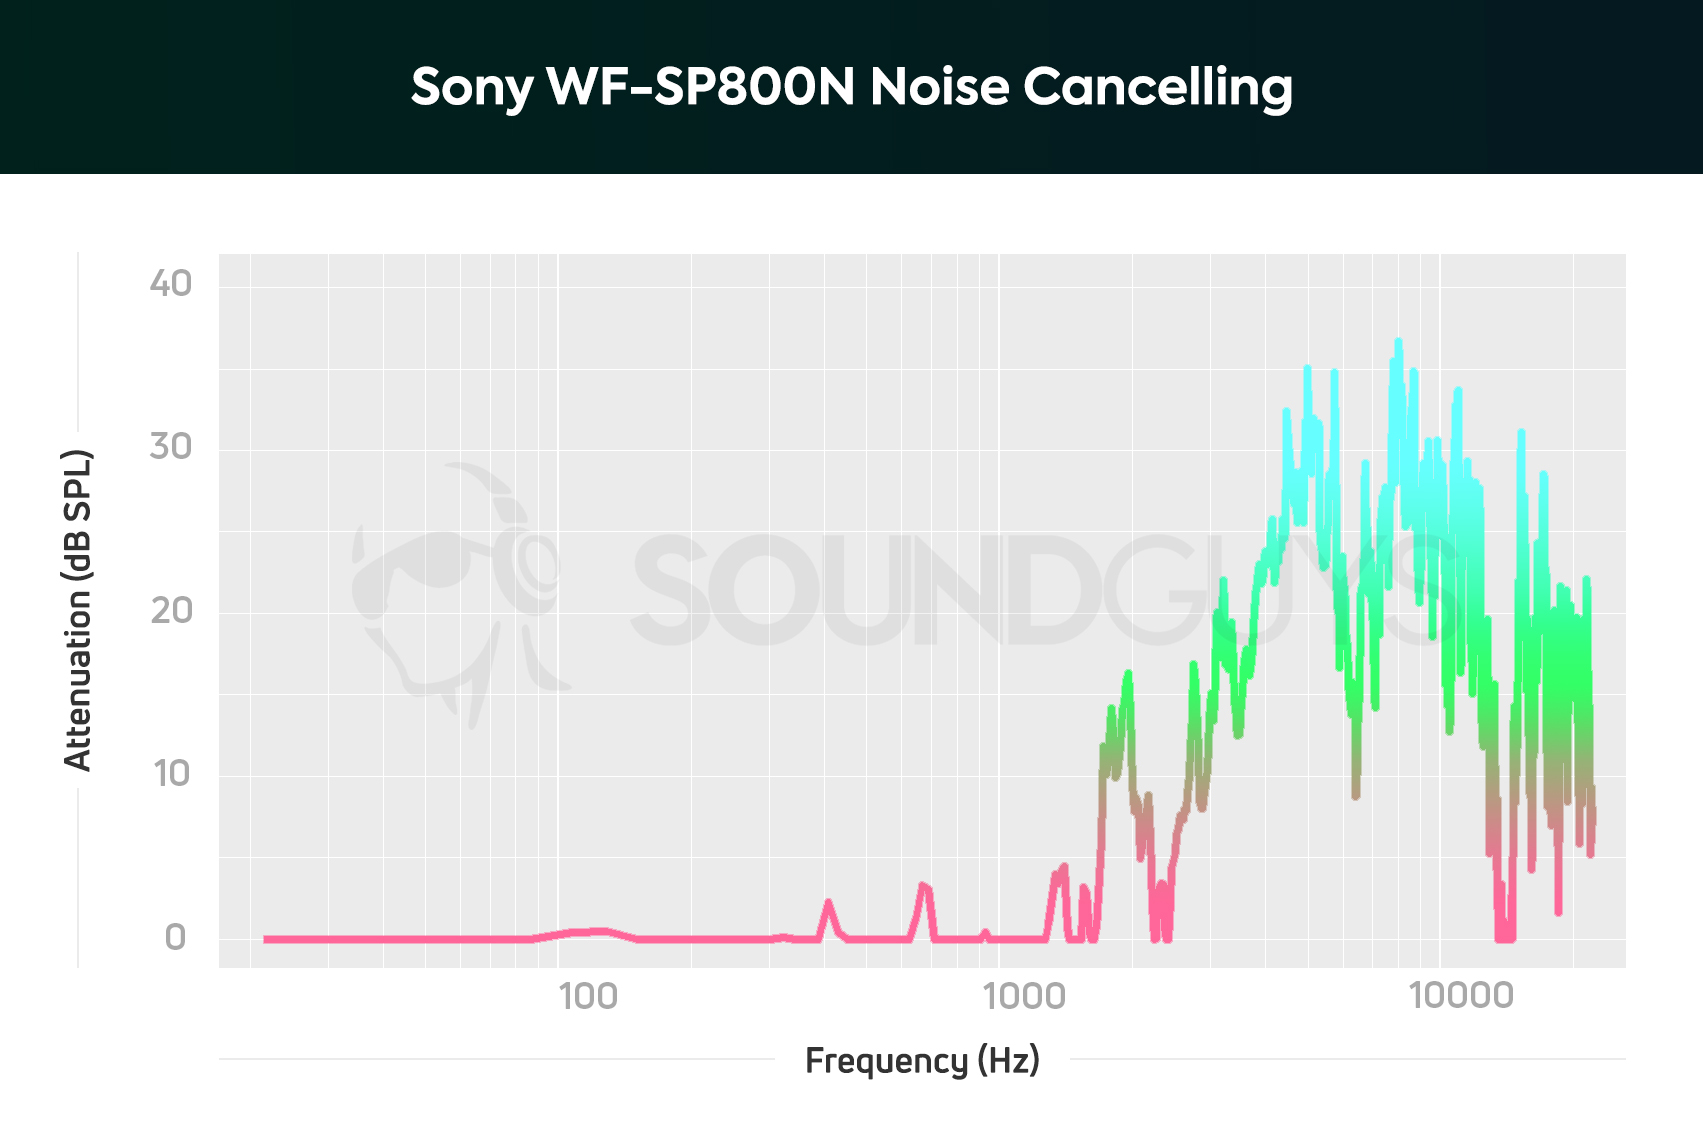 Sony WF-SP800N noise canceling chart showing a very small bump at around 100Hz